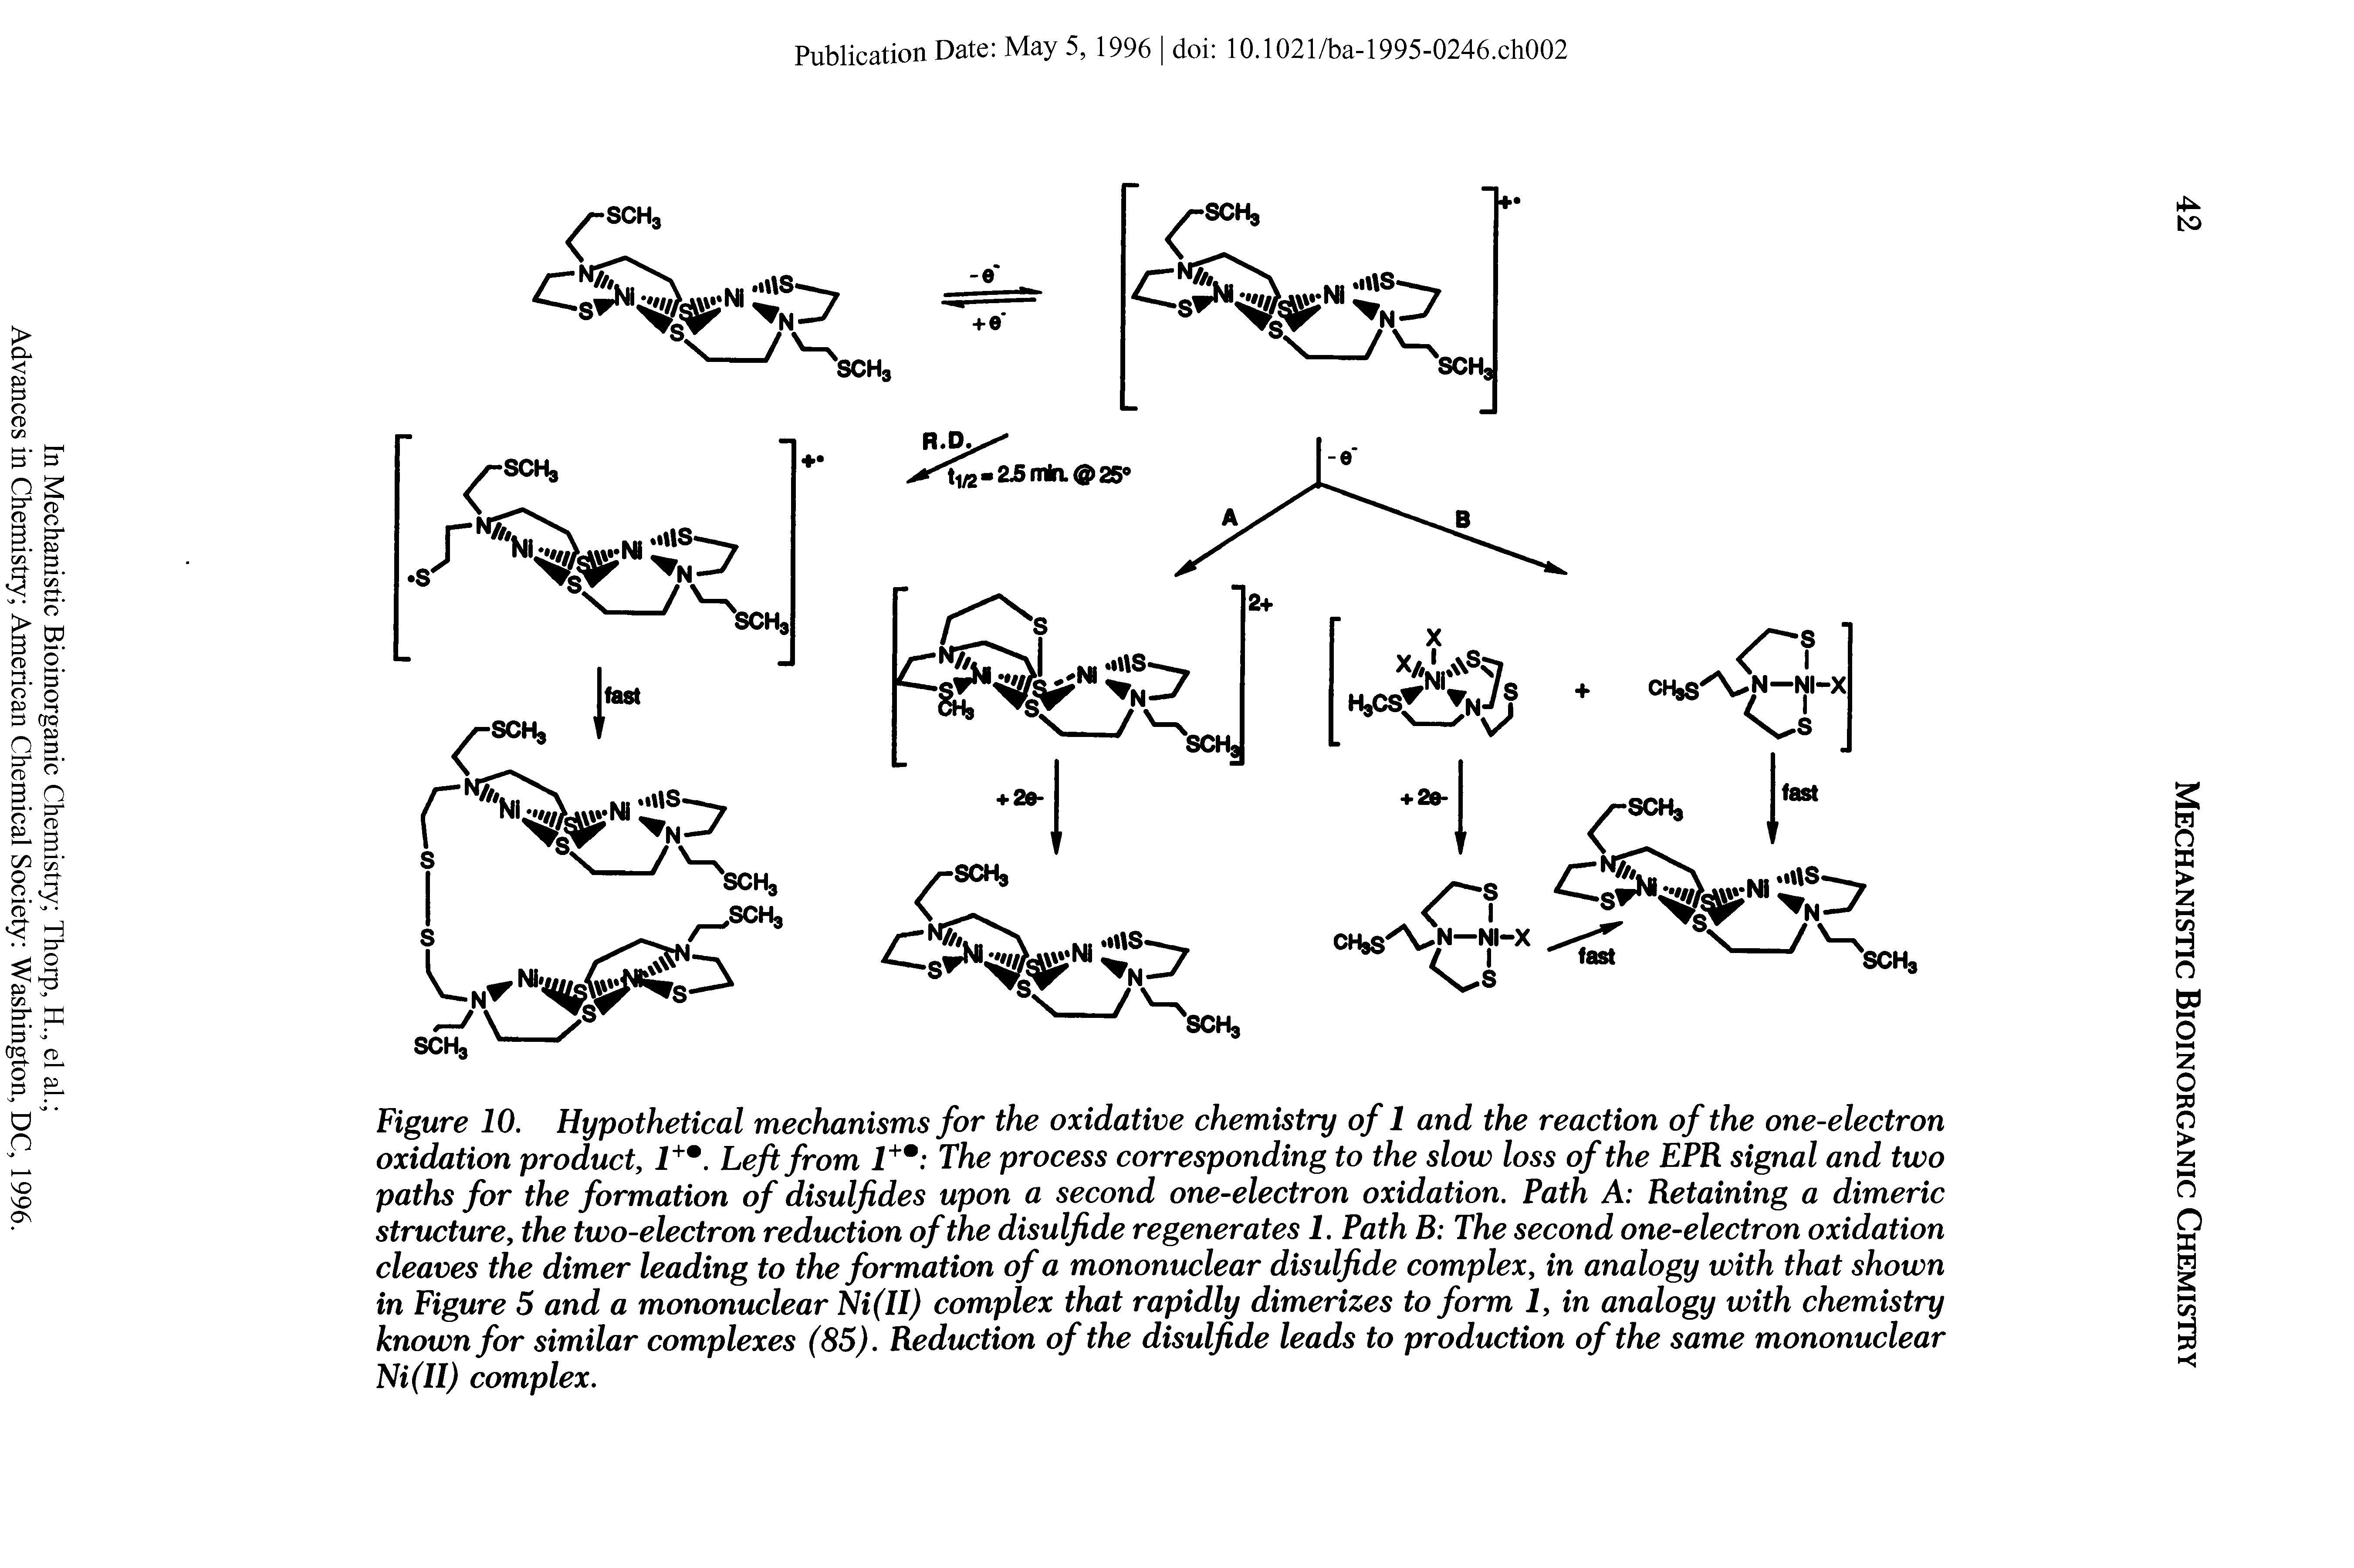 Figure 10. Hypothetical mechanisms for the oxidative chemistry ofl and the reaction of the one-electron oxidation product, l+m. Left from l+% The process corresponding to the slow loss of the EPR signal and two paths for the formation of disulfides upon a second one-electron oxidation. Path A Retaining a dimeric structure, the two-electron reduction of the disulfide regenerates 1. Path B The second one-electron oxidation cleaves the dimer leading to the formation of a mononuclear disulfide complex, in analogy with that shown in Figure 5 and a mononuclear Ni(II) complex that rapidly dimerizes to form 2, in analogy with chemistry known for similar complexes (85). Reduction of the disulfide leads to production of the same mononuclear Ni(II) complex.